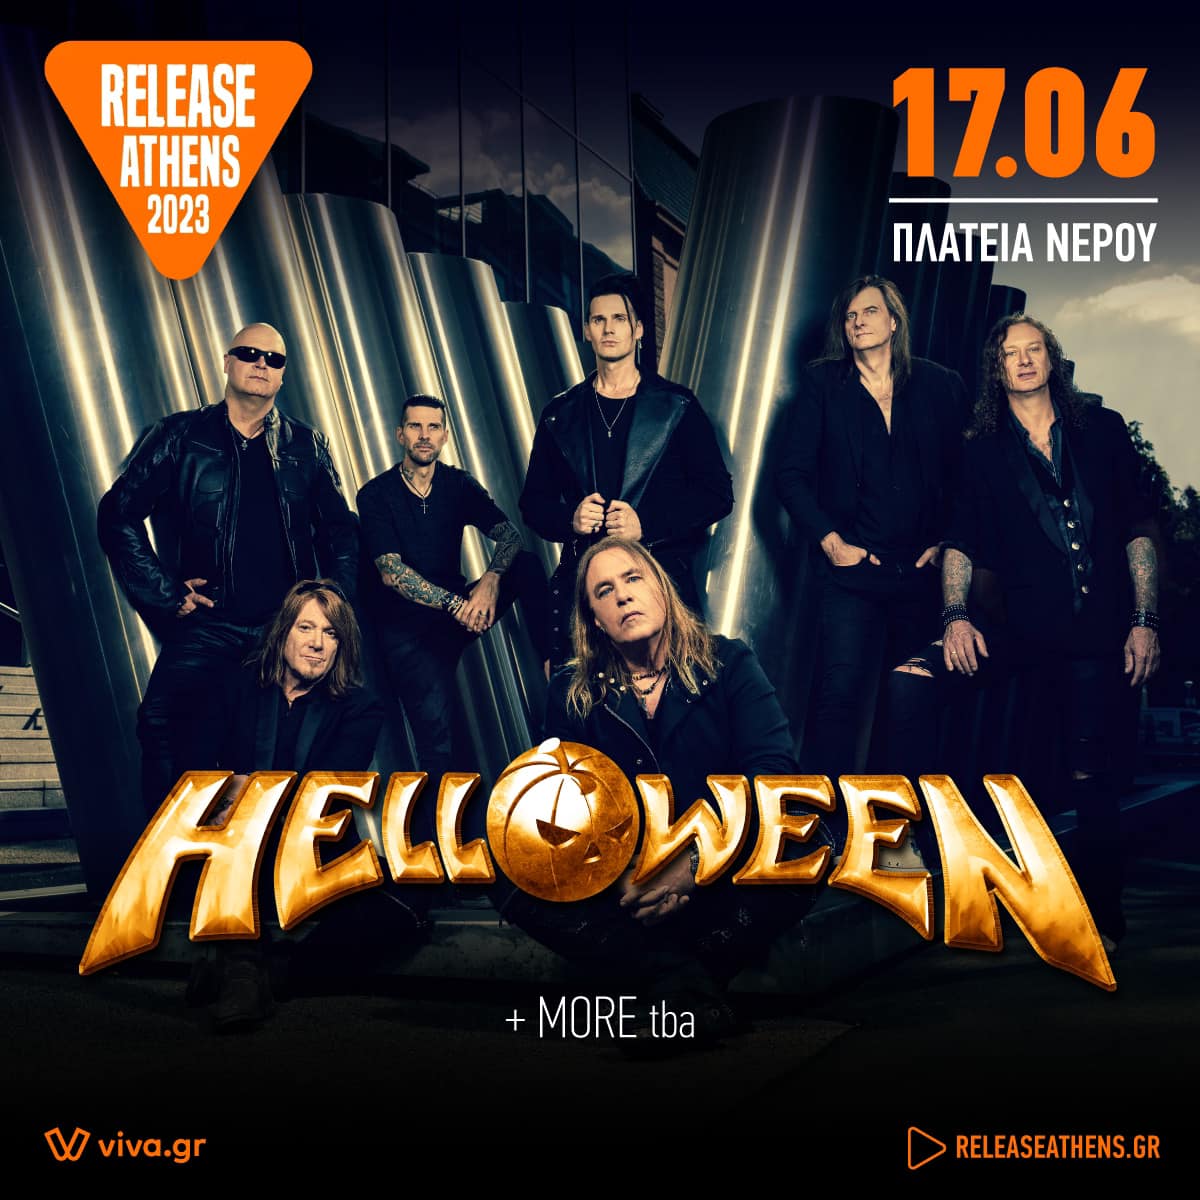 Helloween at Release Athens Festival 2023